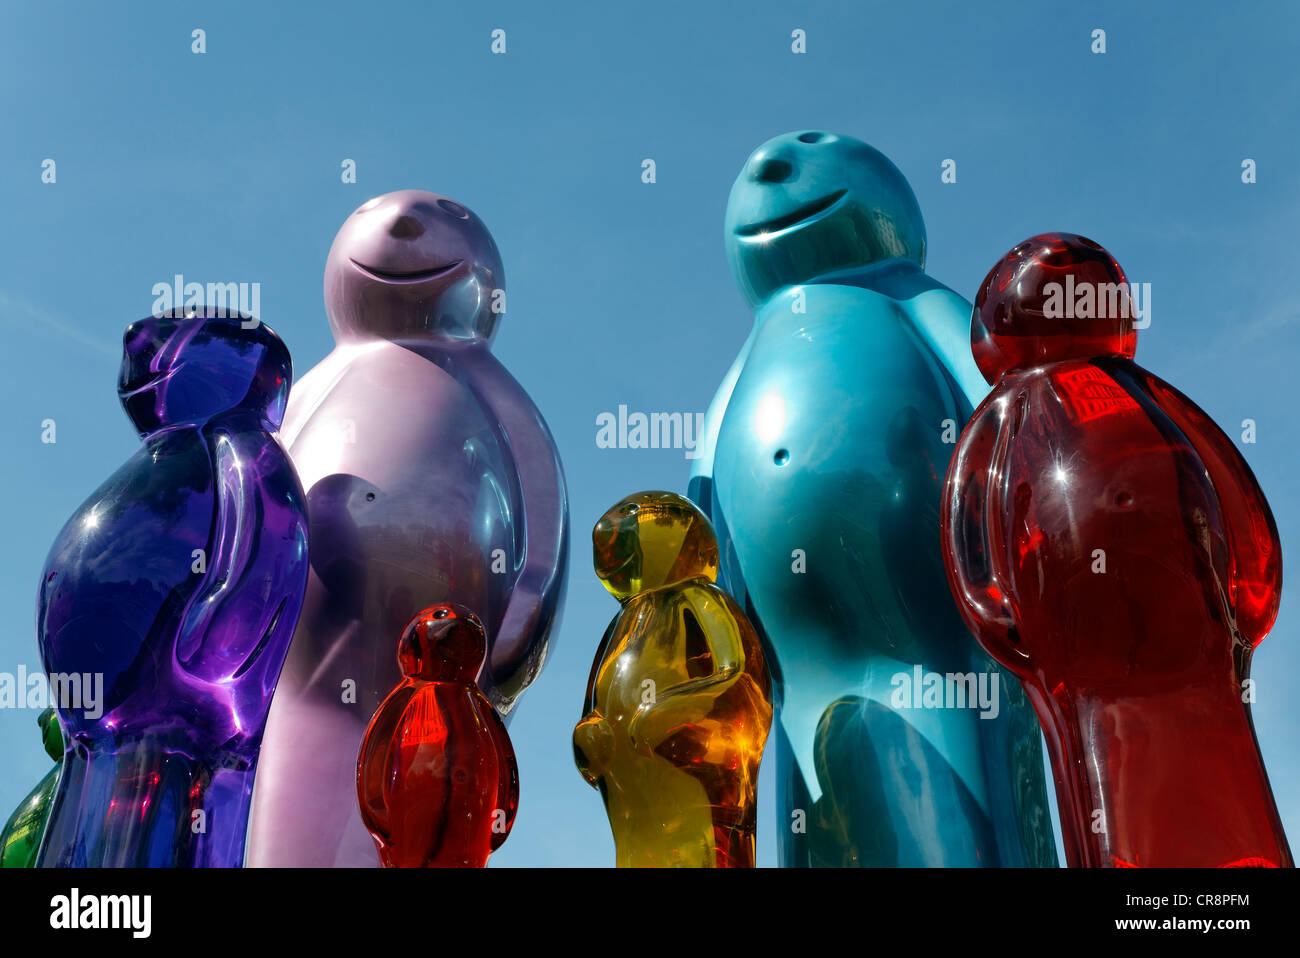 Jelly Babies, colorful transparent plastic figures, sculpture by Mauro Peruchetti, Marble Arch, London, England, United Kingdom Stock Photo